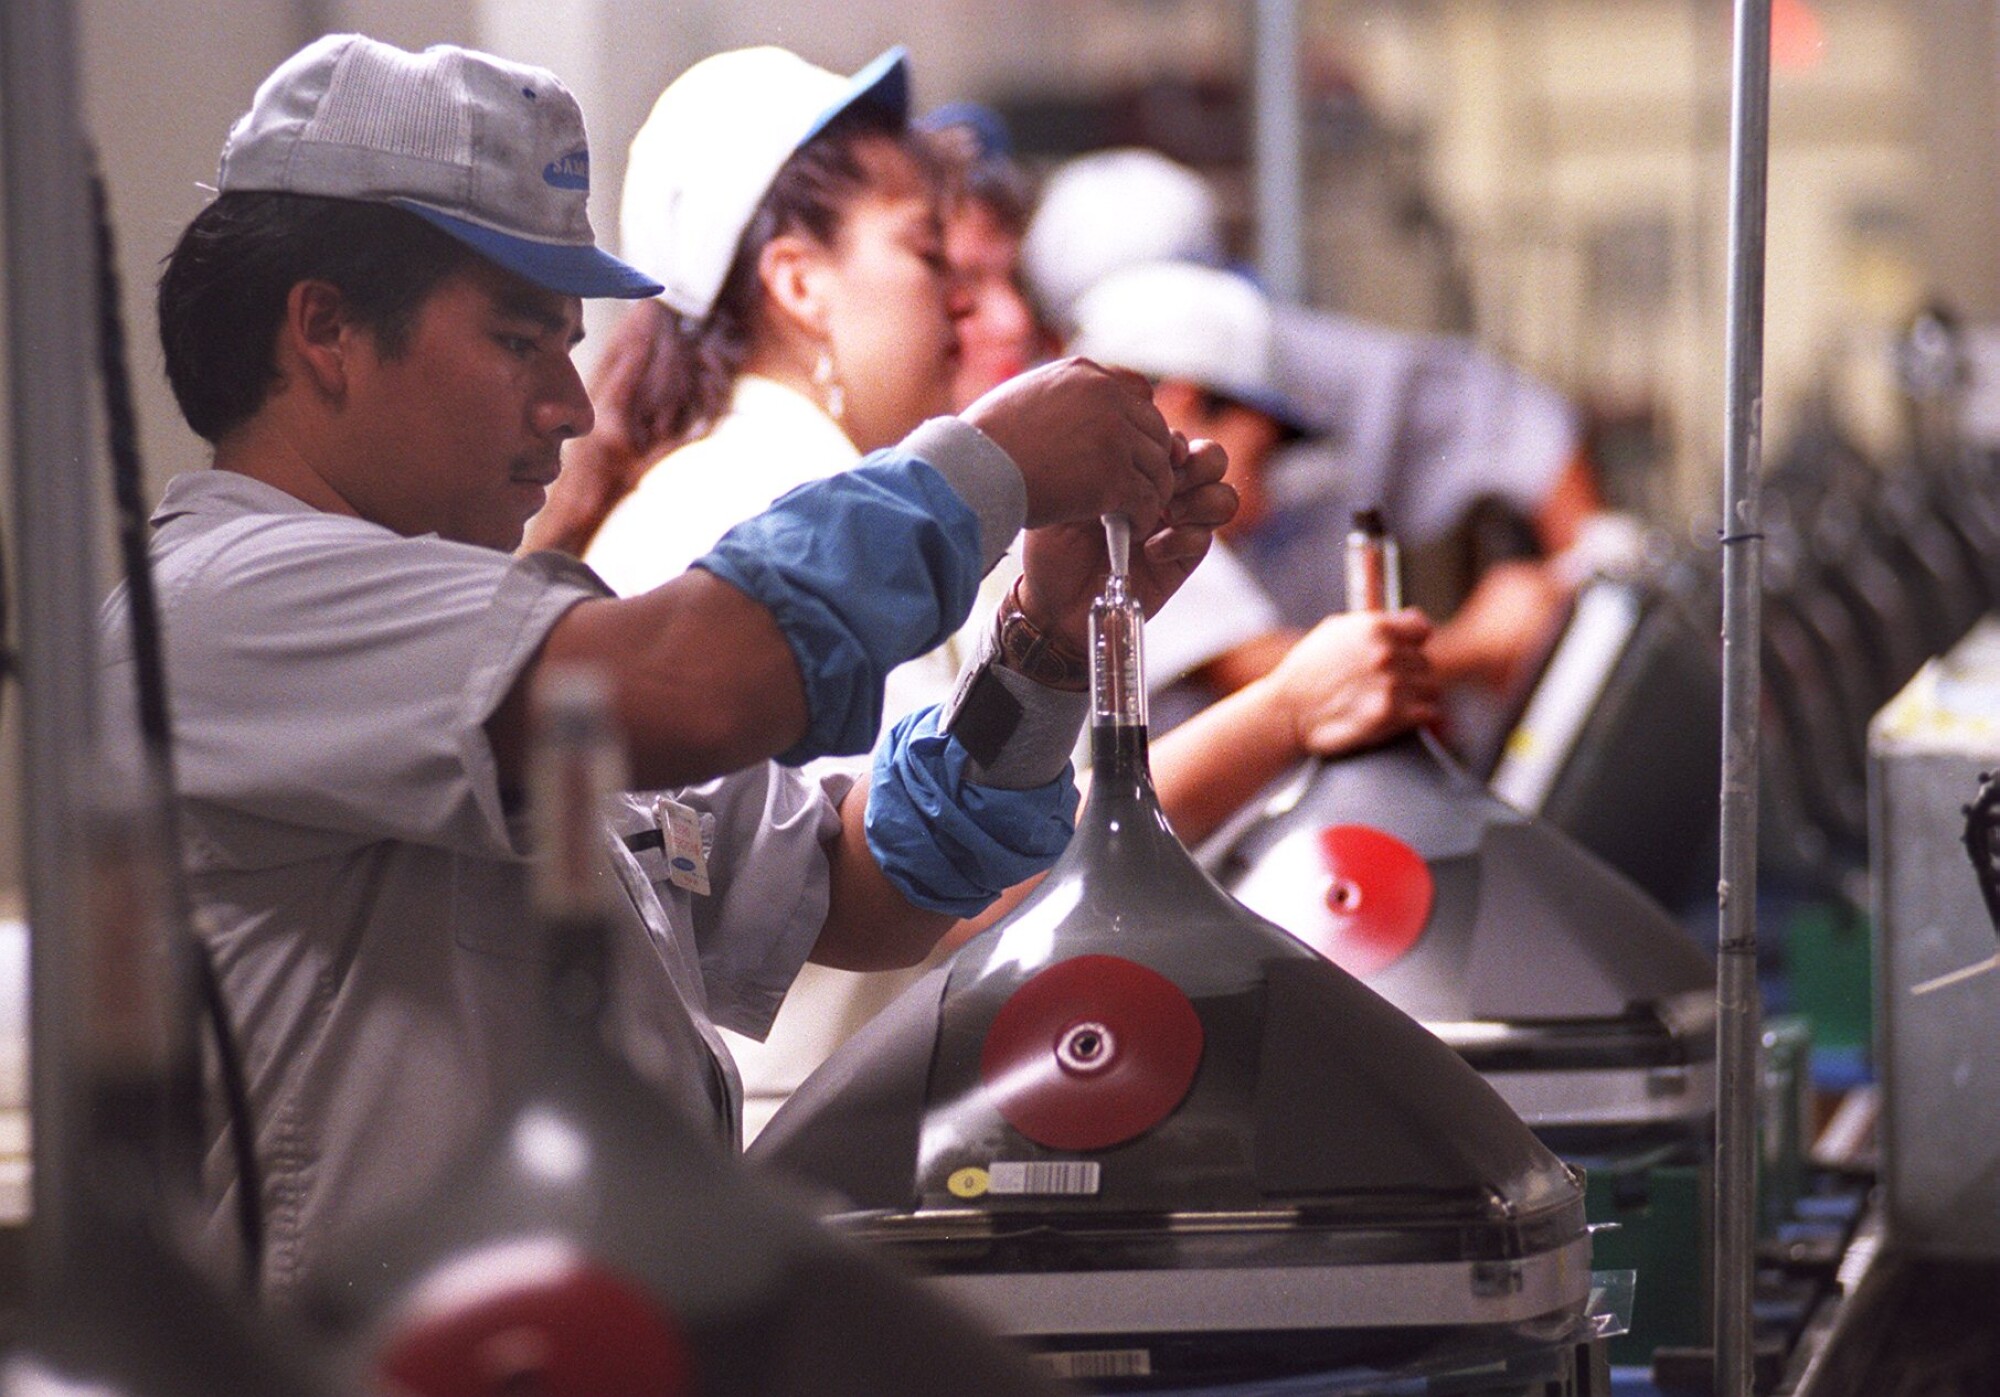 Workers on the assembly line at the Tijuana Samsung television tube manufacturing plant.